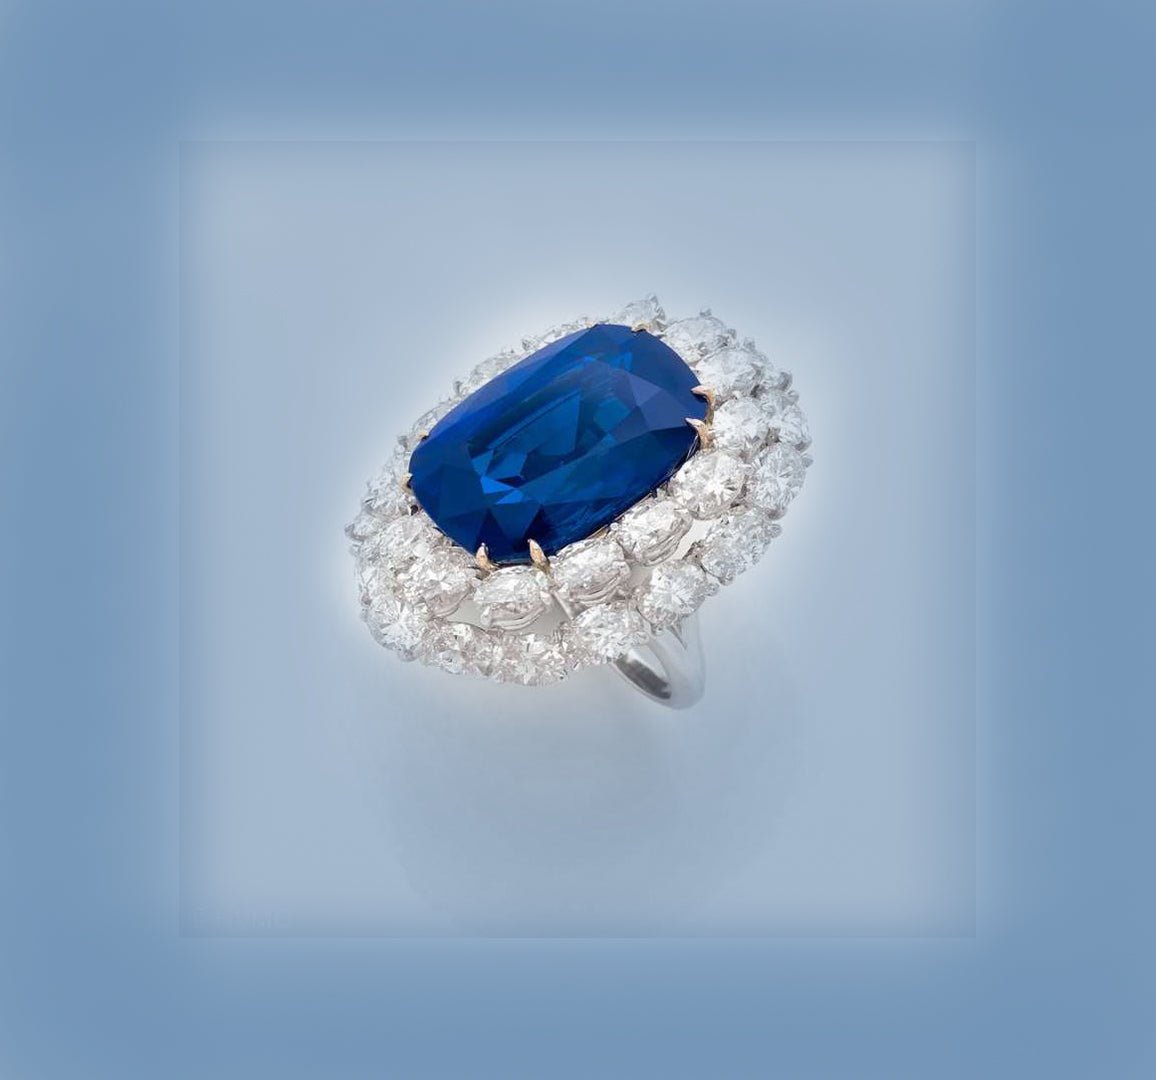 A Kashmir Sapphire Gold Ring Sold for Over 2 Million Euros at an Auction in Monaco - DSF Antique Jewelry